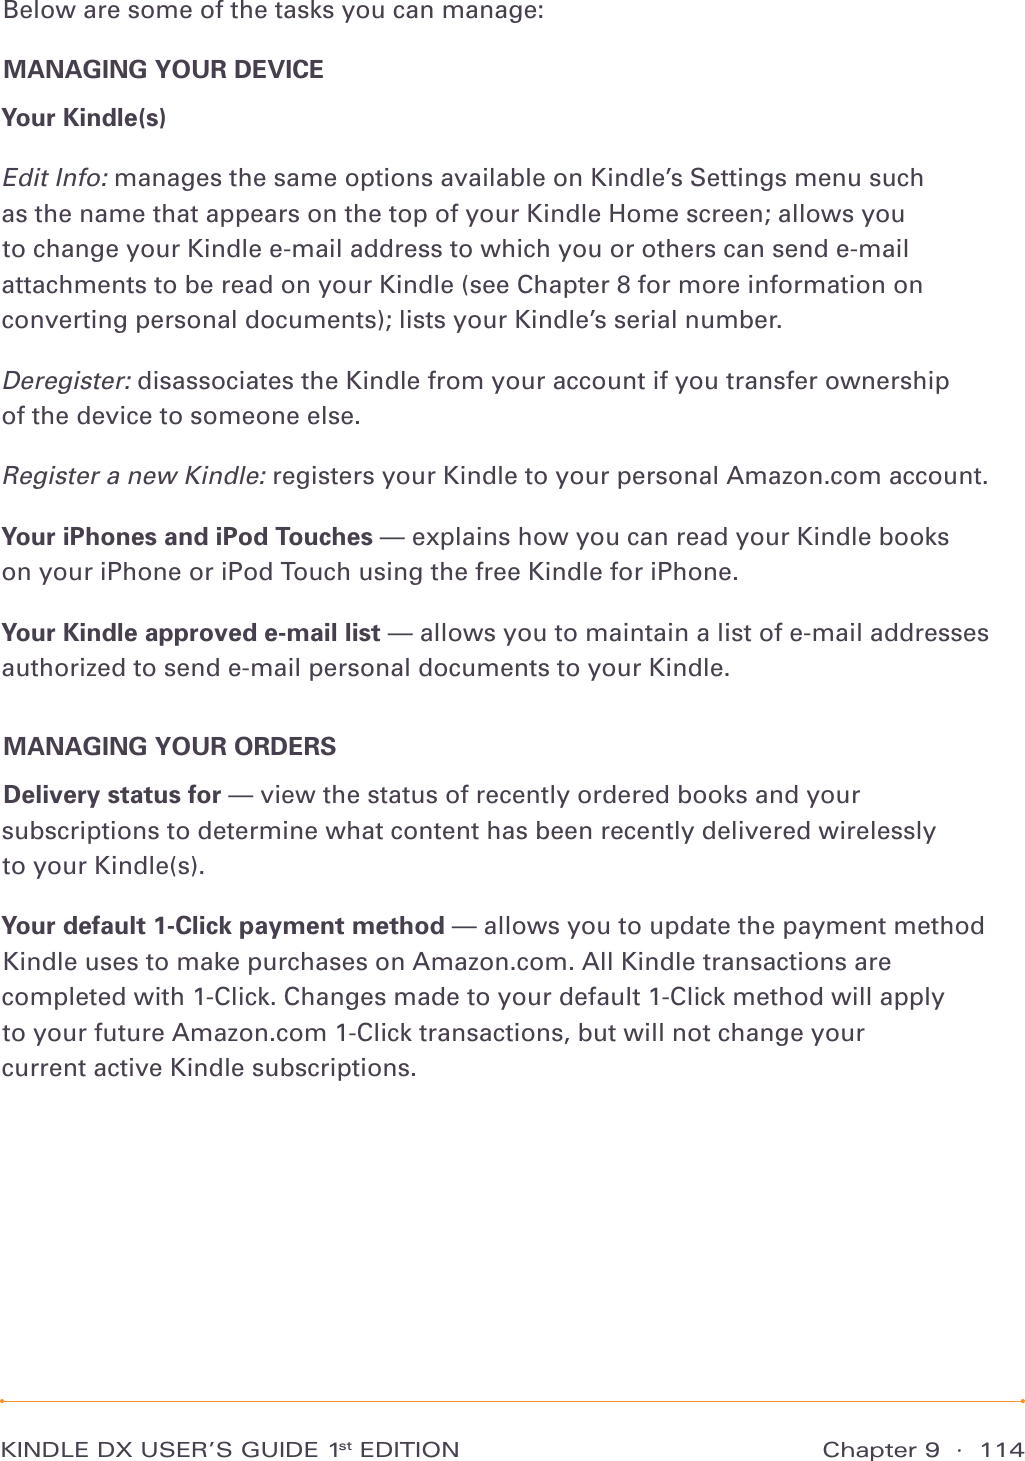 Chapter 9  ·  114KINDLE DX USER’S GUIDE 1st EDITIONBelow are some of the tasks you can manage:MANAGING YOUR DEVICEYour Kindle(s)  Edit Info: manages the same options available on Kindle’s Settings menu such as the name that appears on the top of your Kindle Home screen; allows you to change your Kindle e-mail address to which you or others can send e-mail attachments to be read on your Kindle (see Chapter 8 for more information on converting personal documents); lists your Kindle’s serial number.Deregister: disassociates the Kindle from your account if you transfer ownership of the device to someone else.Register a new Kindle: registers your Kindle to your personal Amazon.com account.Your iPhones and iPod Touches — explains how you can read your Kindle books on your iPhone or iPod Touch using the free Kindle for iPhone.Your Kindle approved e-mail list — allows you to maintain a list of e-mail addresses authorized to send e-mail personal documents to your Kindle.MANAGING YOUR ORDERSDelivery status for — view the status of recently ordered books and your subscriptions to determine what content has been recently delivered wirelessly  to your Kindle(s).Your default 1-Click payment method — allows you to update the payment method Kindle uses to make purchases on Amazon.com. All Kindle transactions are  completed with 1-Click. Changes made to your default 1-Click method will apply  to your future Amazon.com 1-Click transactions, but will not change your  current active Kindle subscriptions.